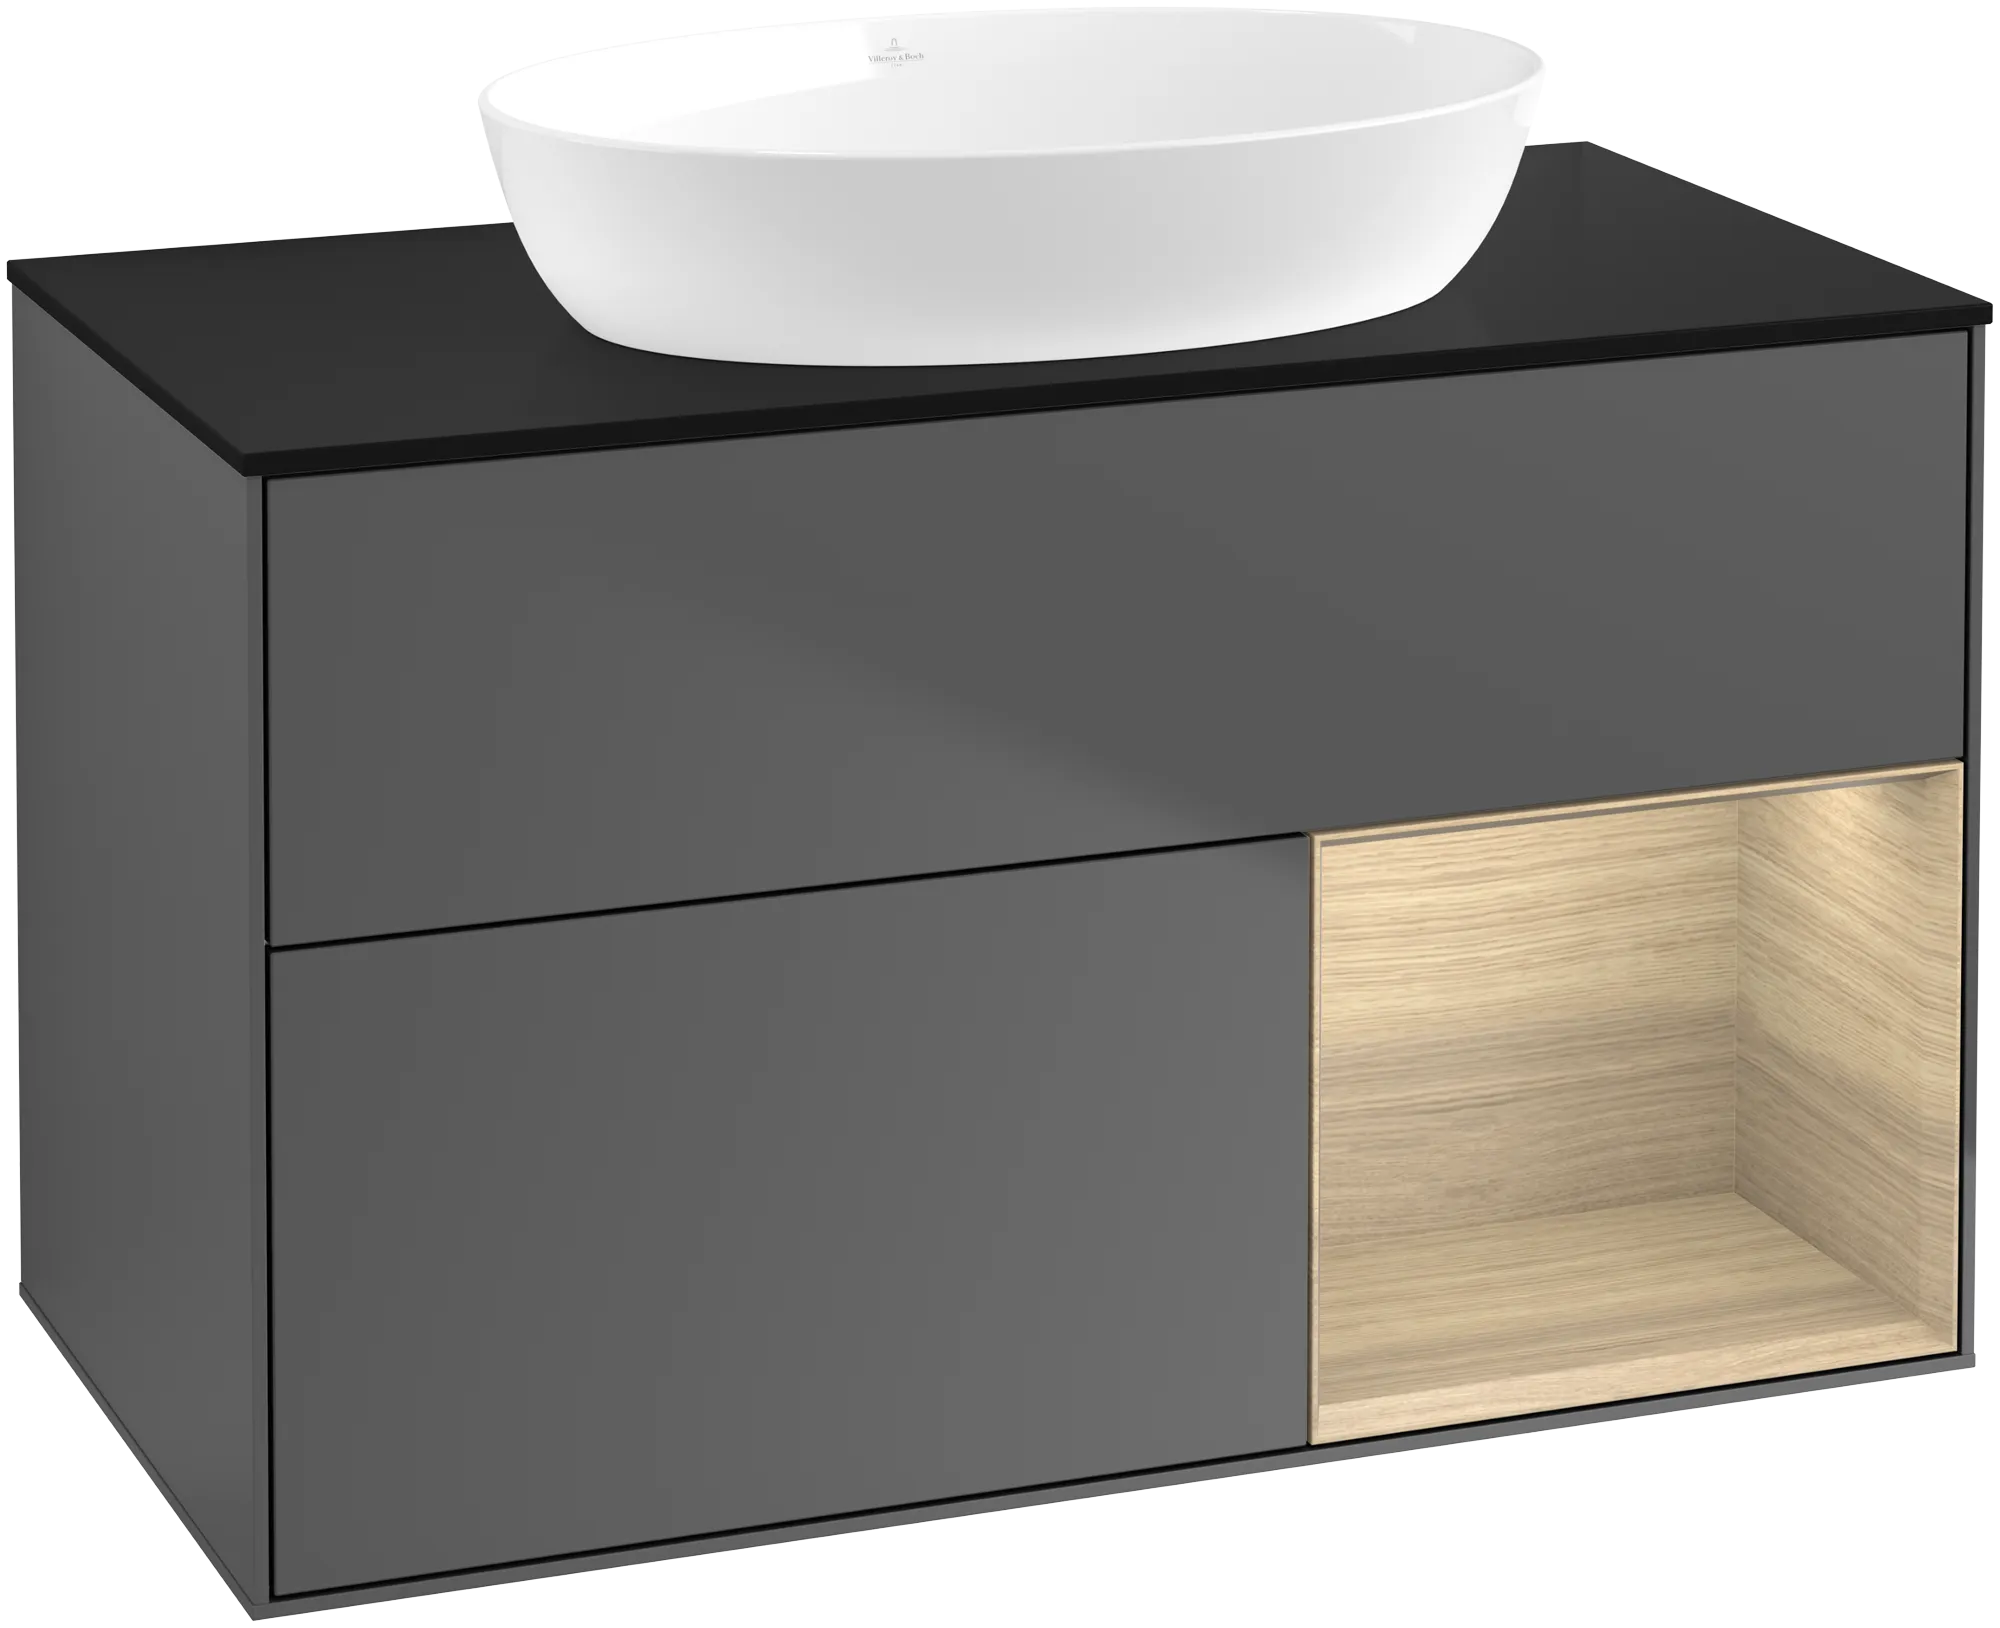 Picture of VILLEROY BOCH Finion Vanity unit, with lighting, 2 pull-out compartments, 1000 x 603 x 501 mm, Anthracite Matt Lacquer / Oak Veneer / Glass Black Matt #GA22PCGK